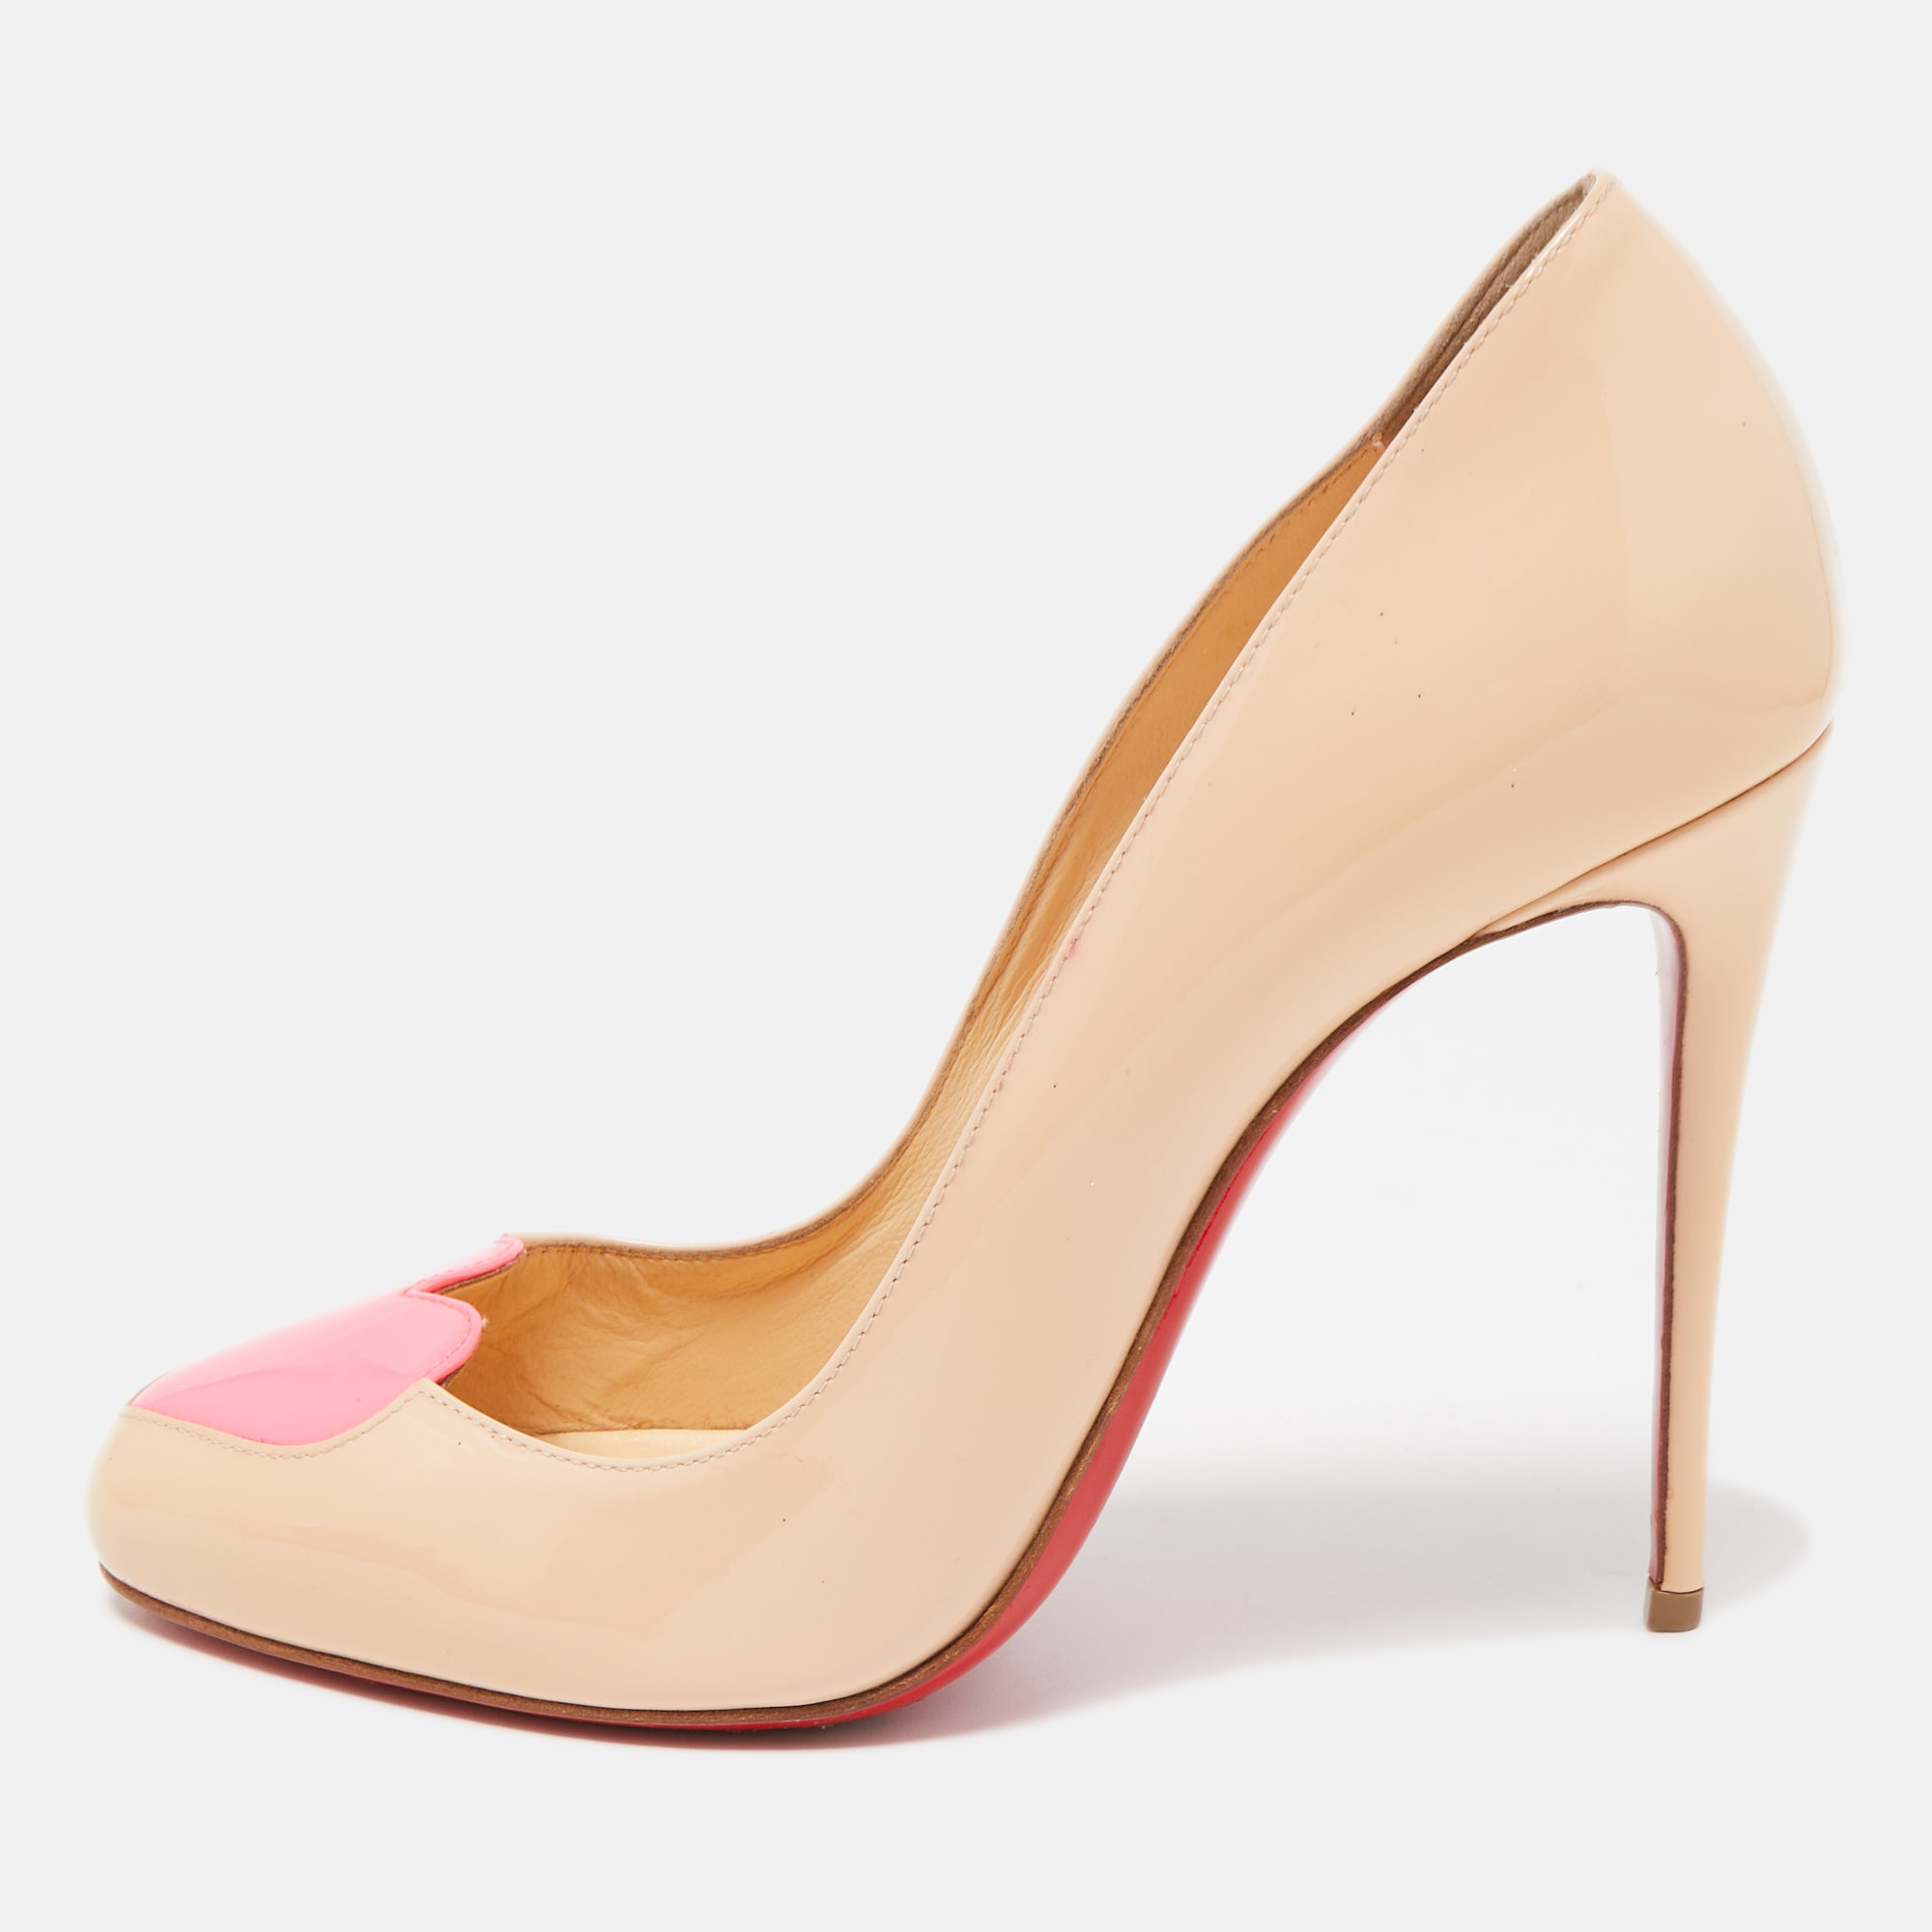 Pre-owned Christian Louboutin Beige Patent Doracora Pumps Size 38